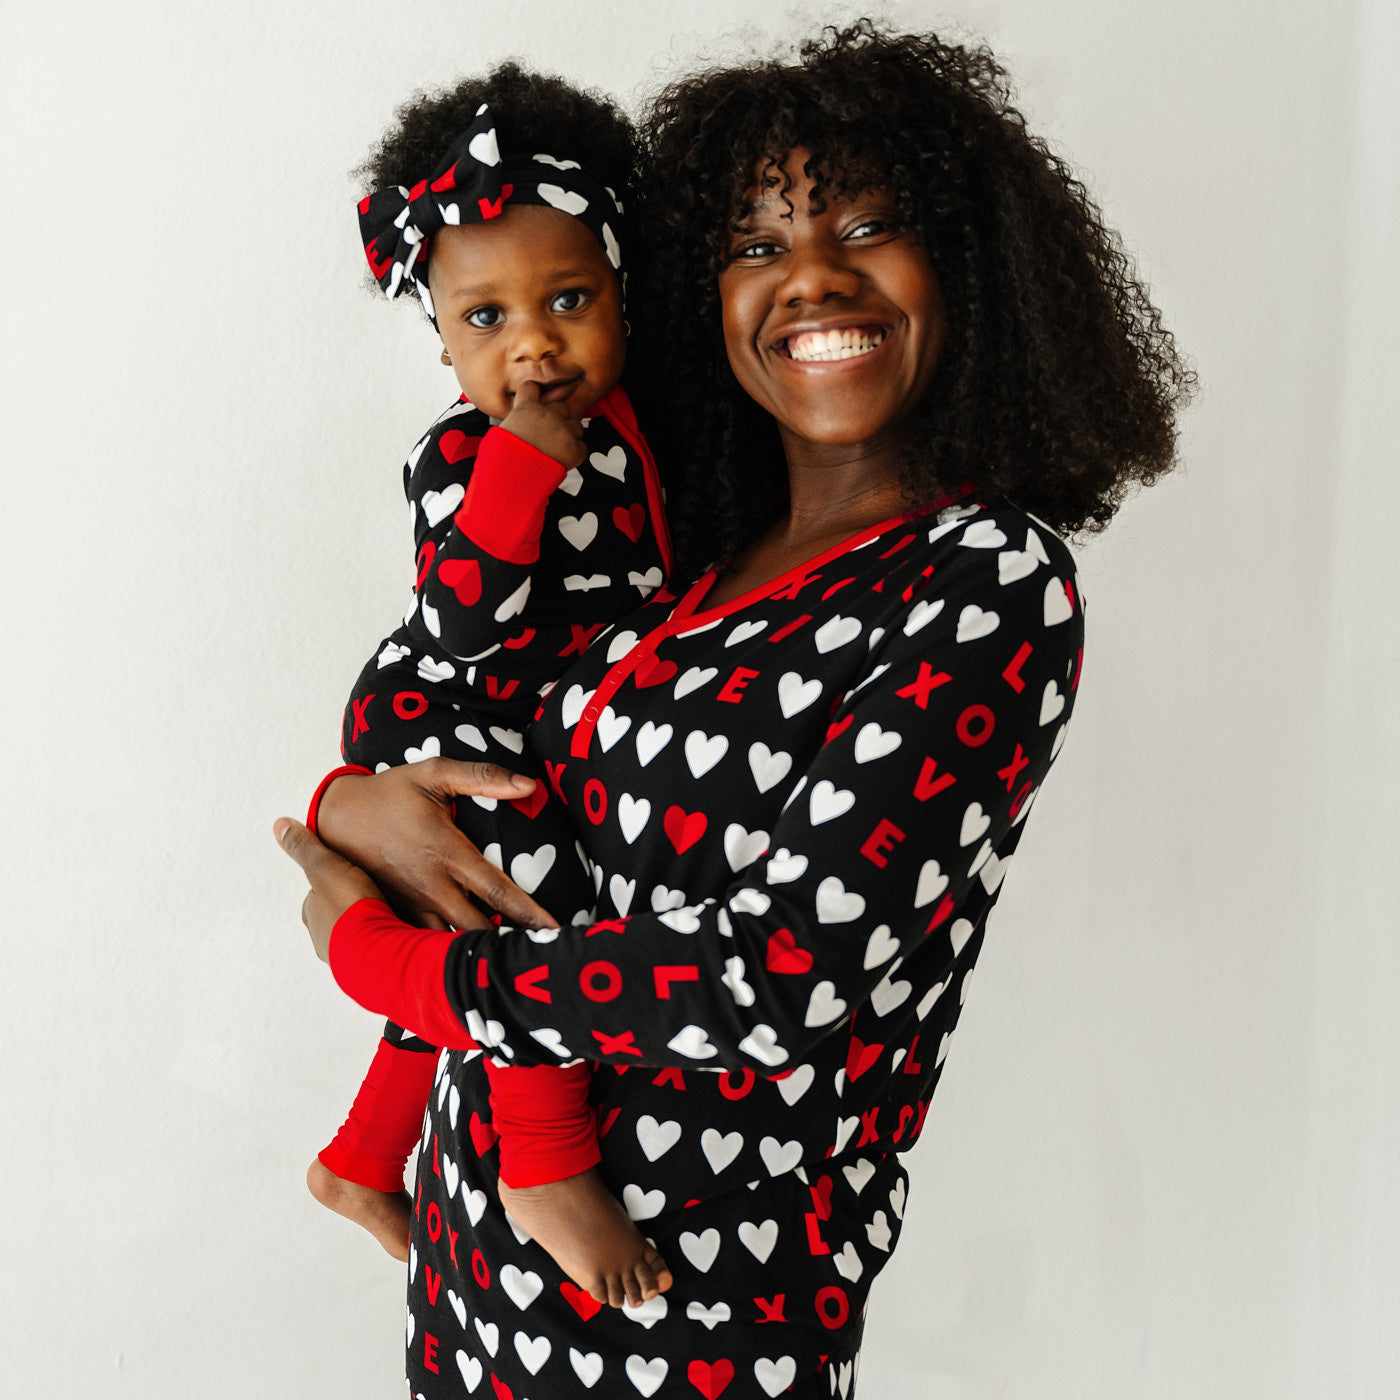 Mom holding her daughter wearing matching Black XOXO pajama sets. Mom is wearing a Black XOXO women's pajama top and child is wearing a Black XOXO zippy paired with a matching luxe bow headband.